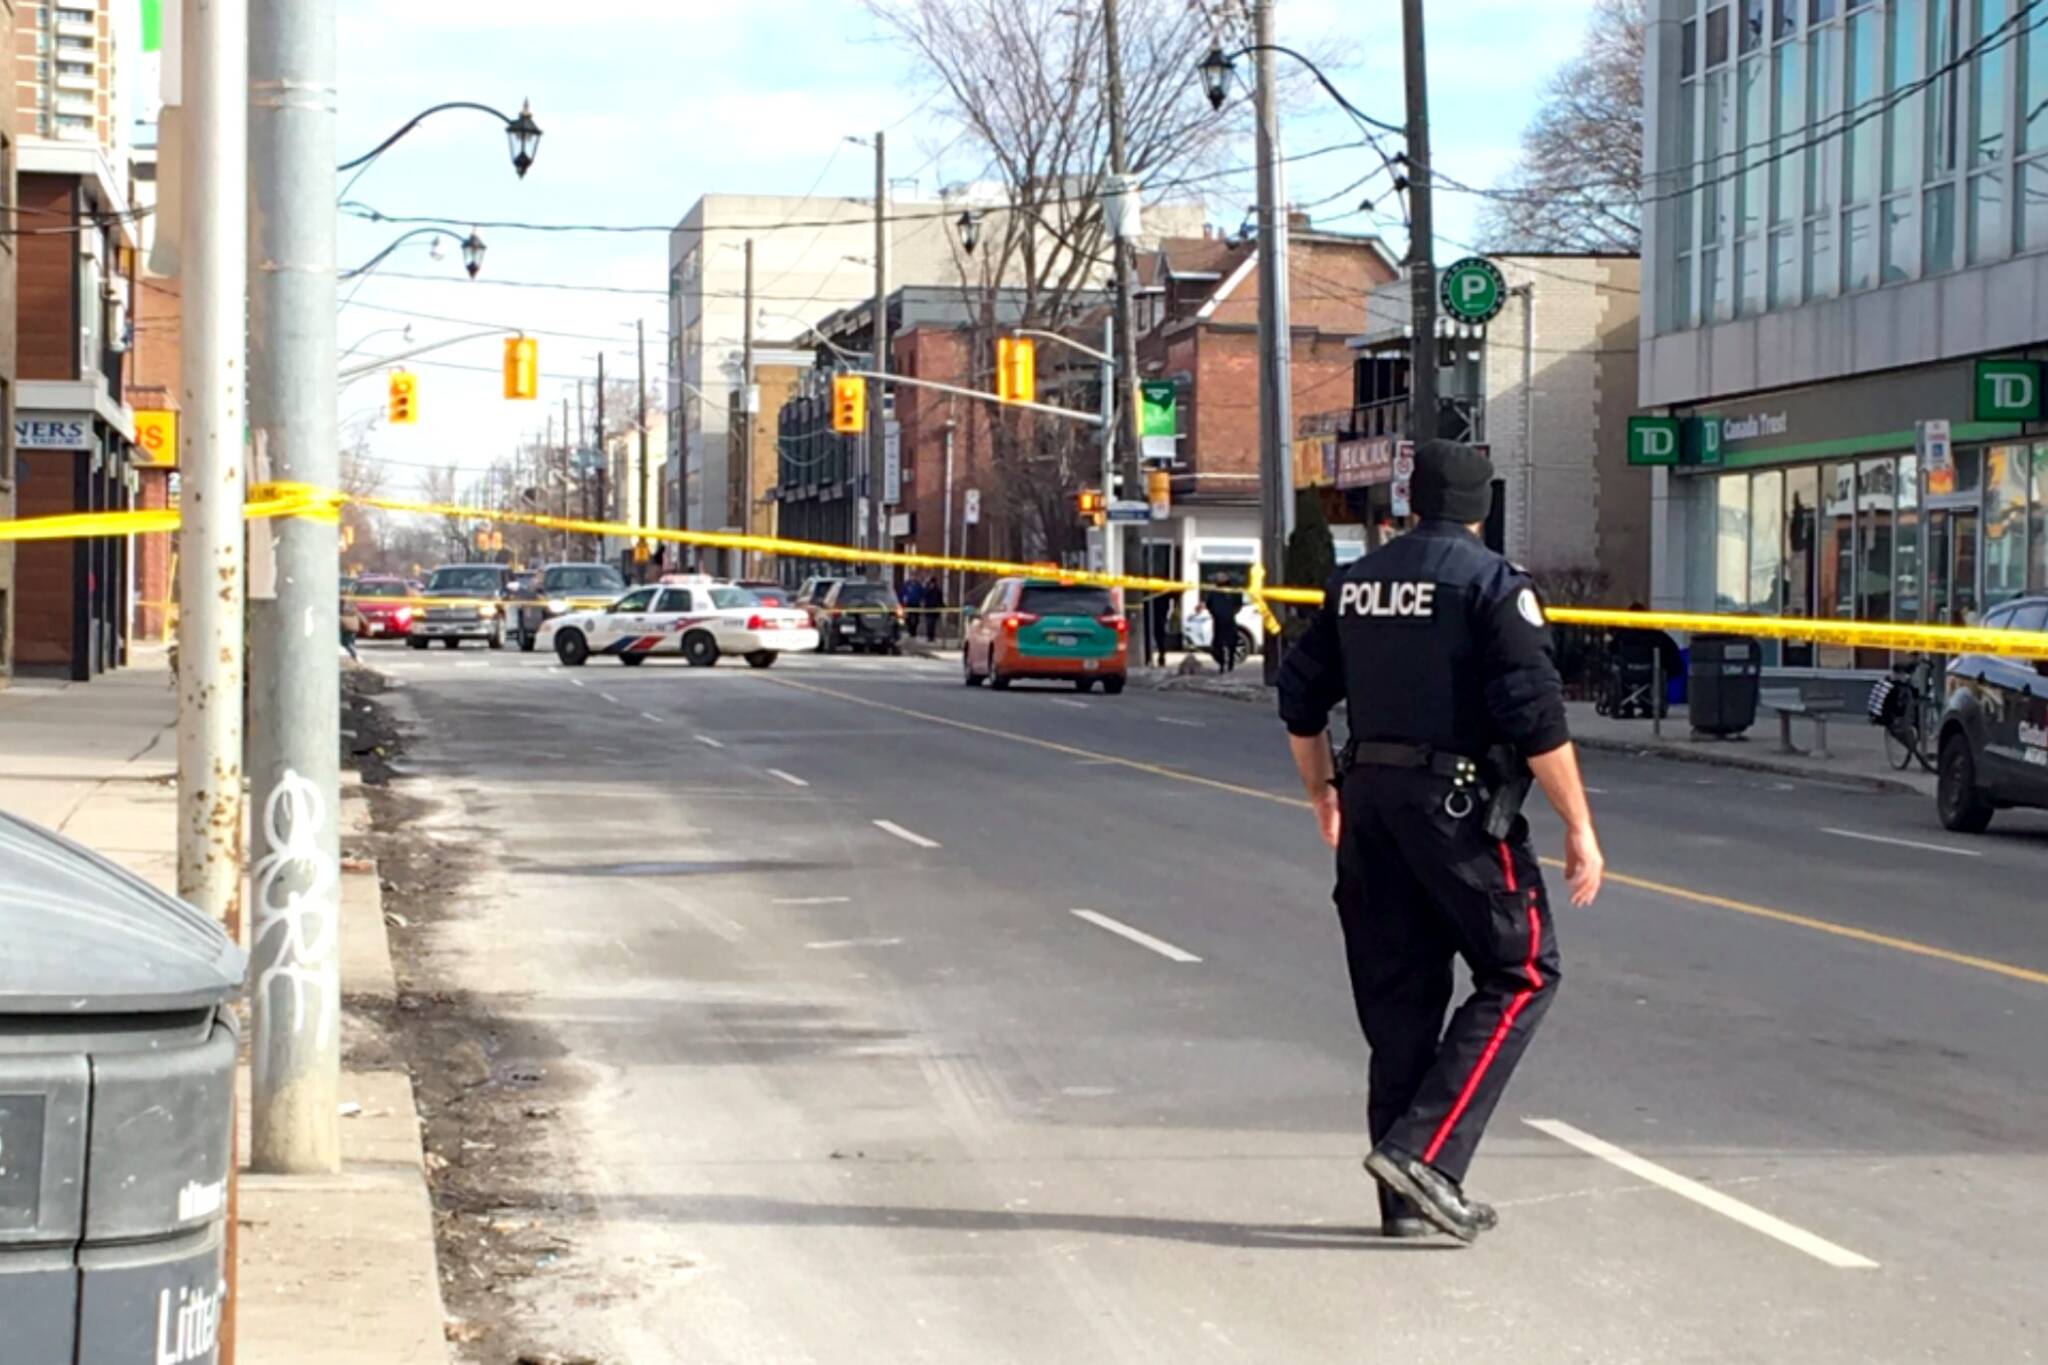 Suspicious package shuts down Broadview subway station for hours